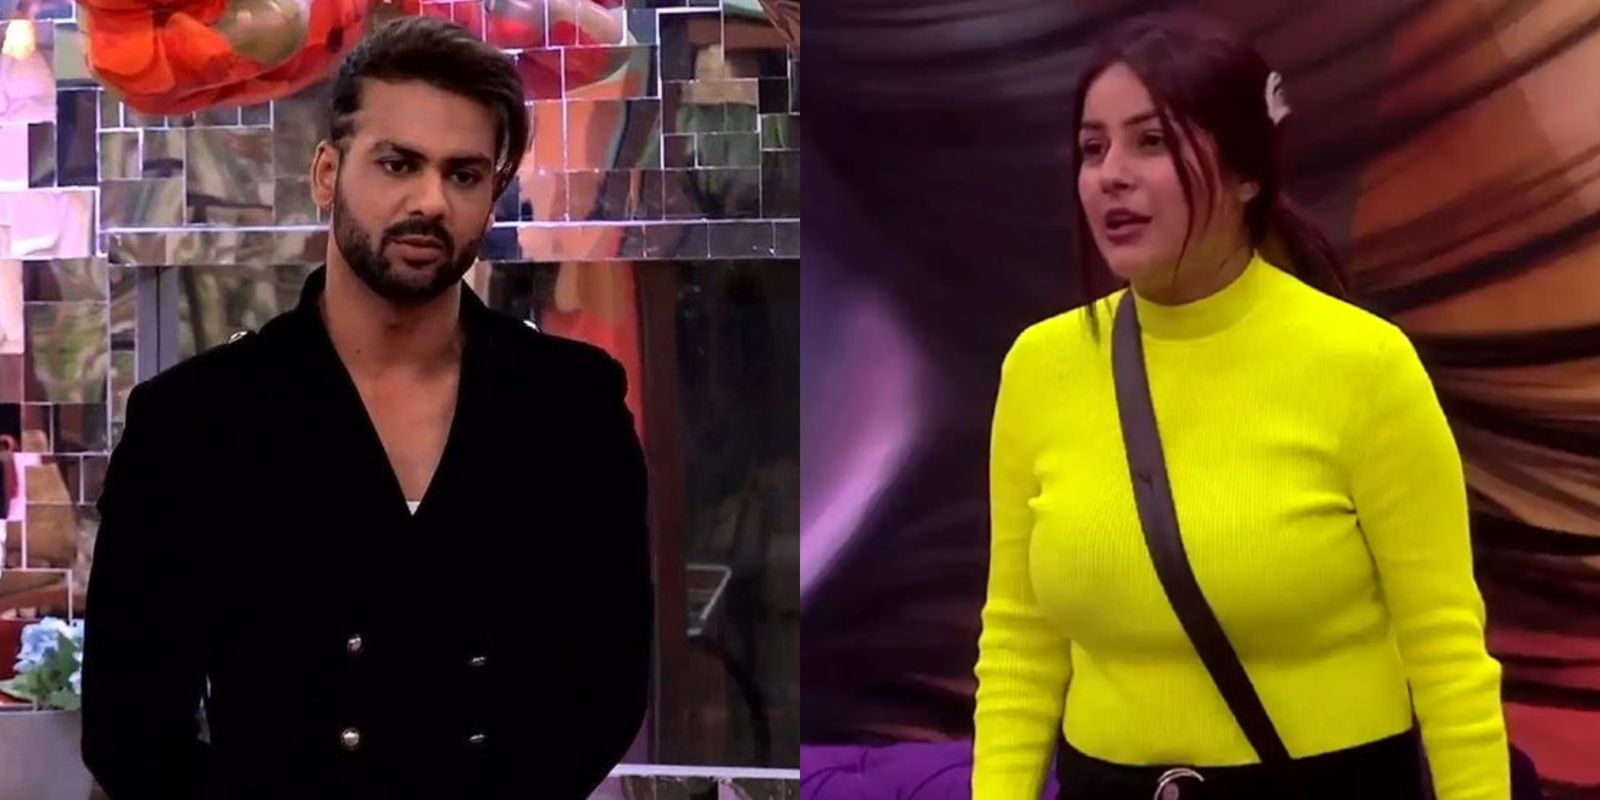 Bigg Boss 13: Shehnaaz Gill Reveals Why She Ran Away From Home In A Candid Conversation With Vishal Aditya Singh